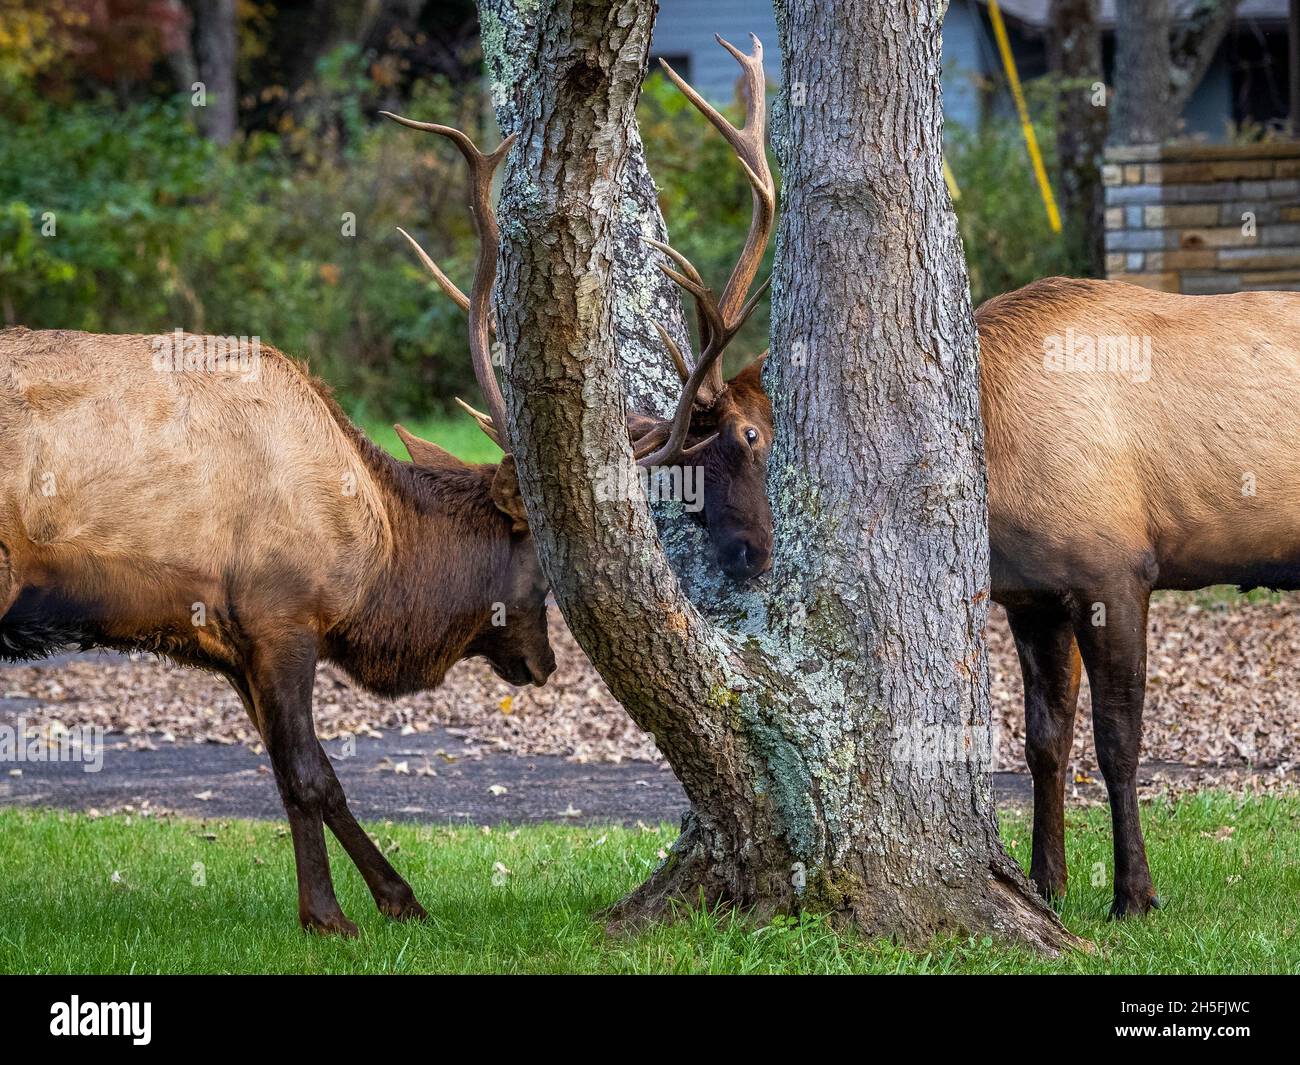 Two Elk or  Manitoban Elk sparring  near Oconaluftee Visitor Center in Great Smoky Mountains National Park in North Carolina USA Stock Photo